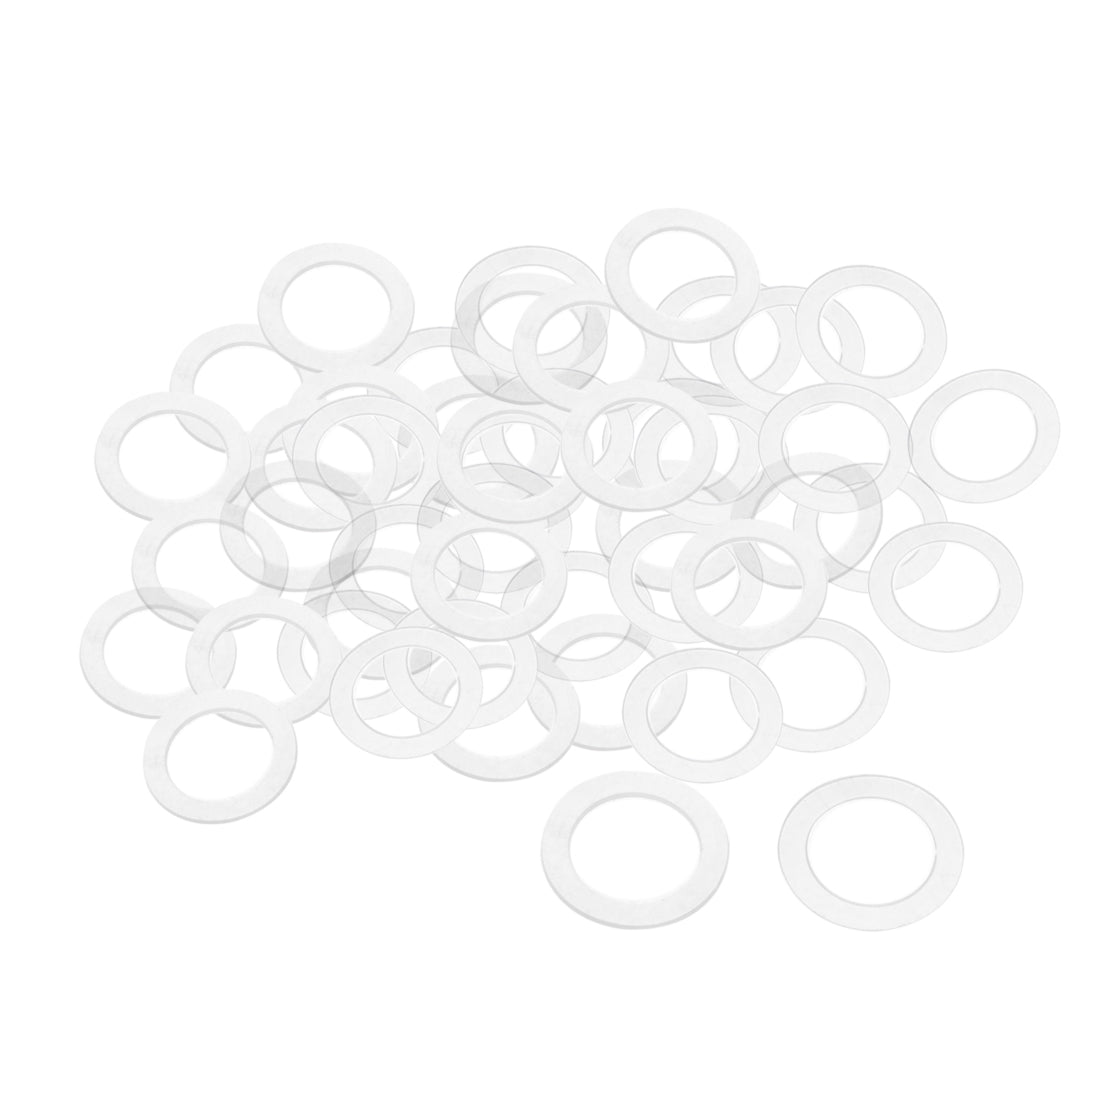 uxcell Uxcell White Nylon Flat Washers for Screws Bolts 200PCS